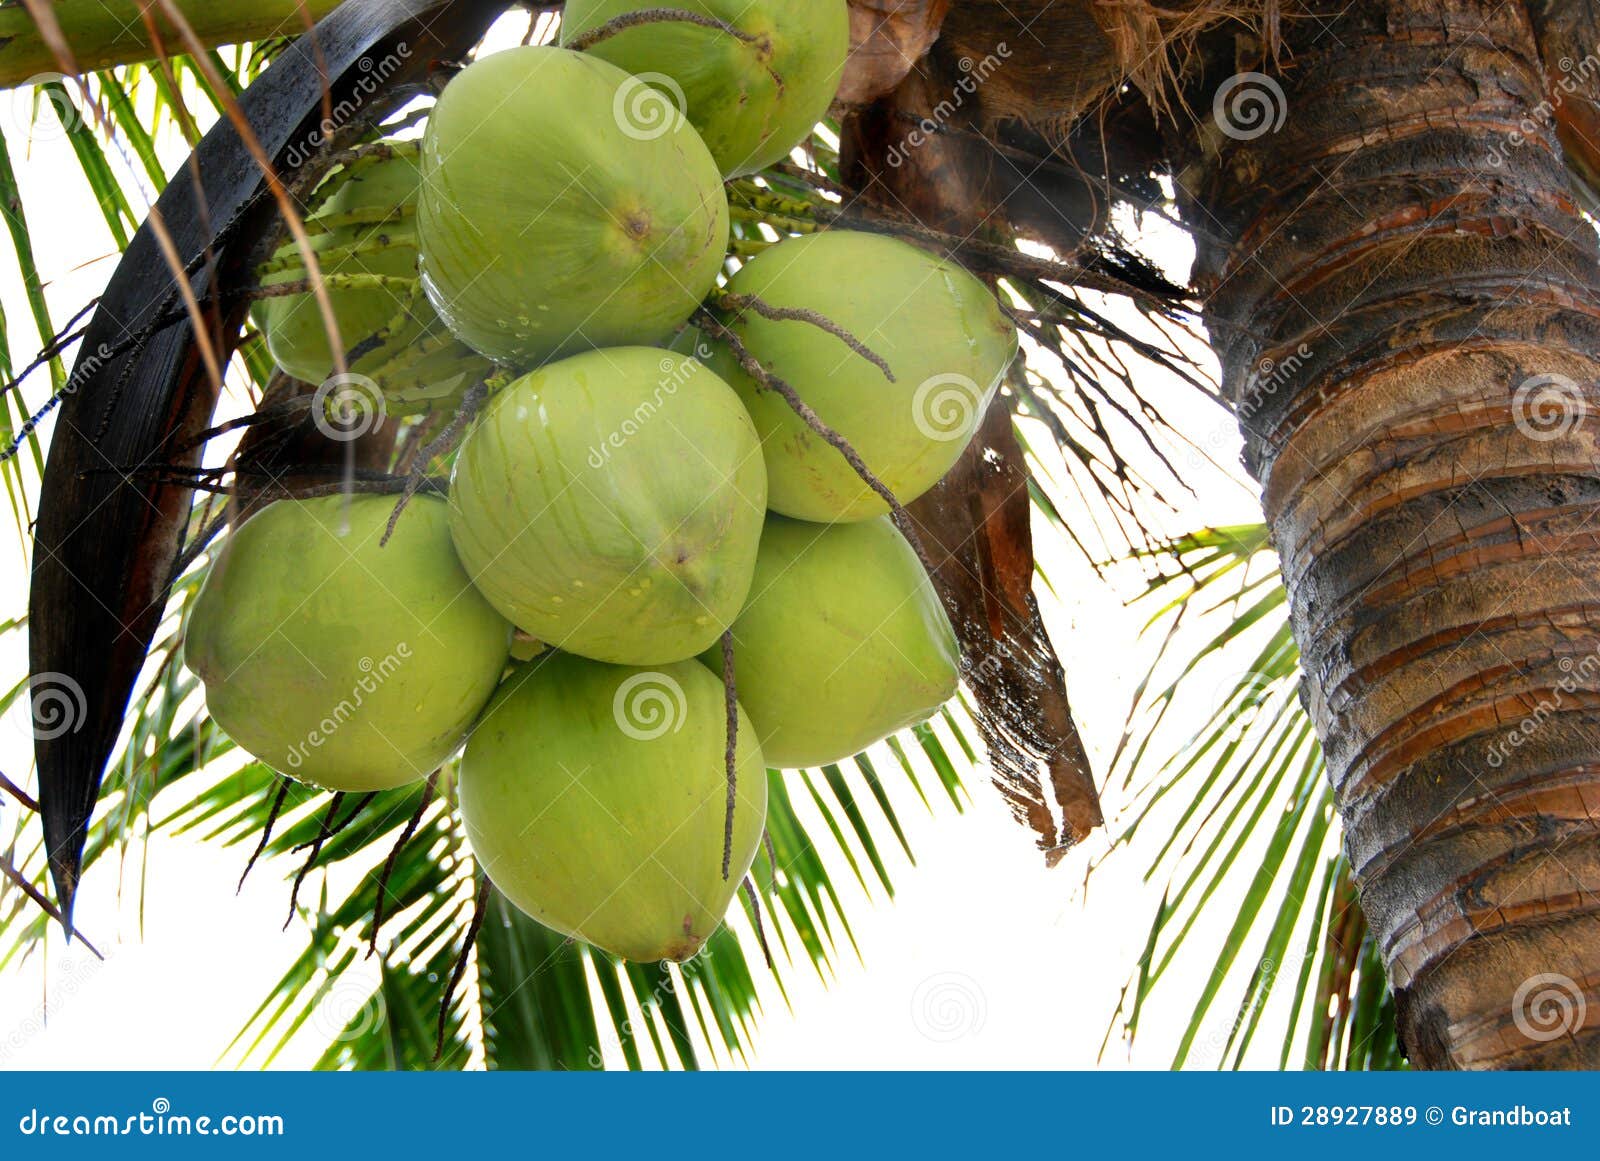 Coconut palm (coconut) stock image. Image of island, outdoor - 28927889